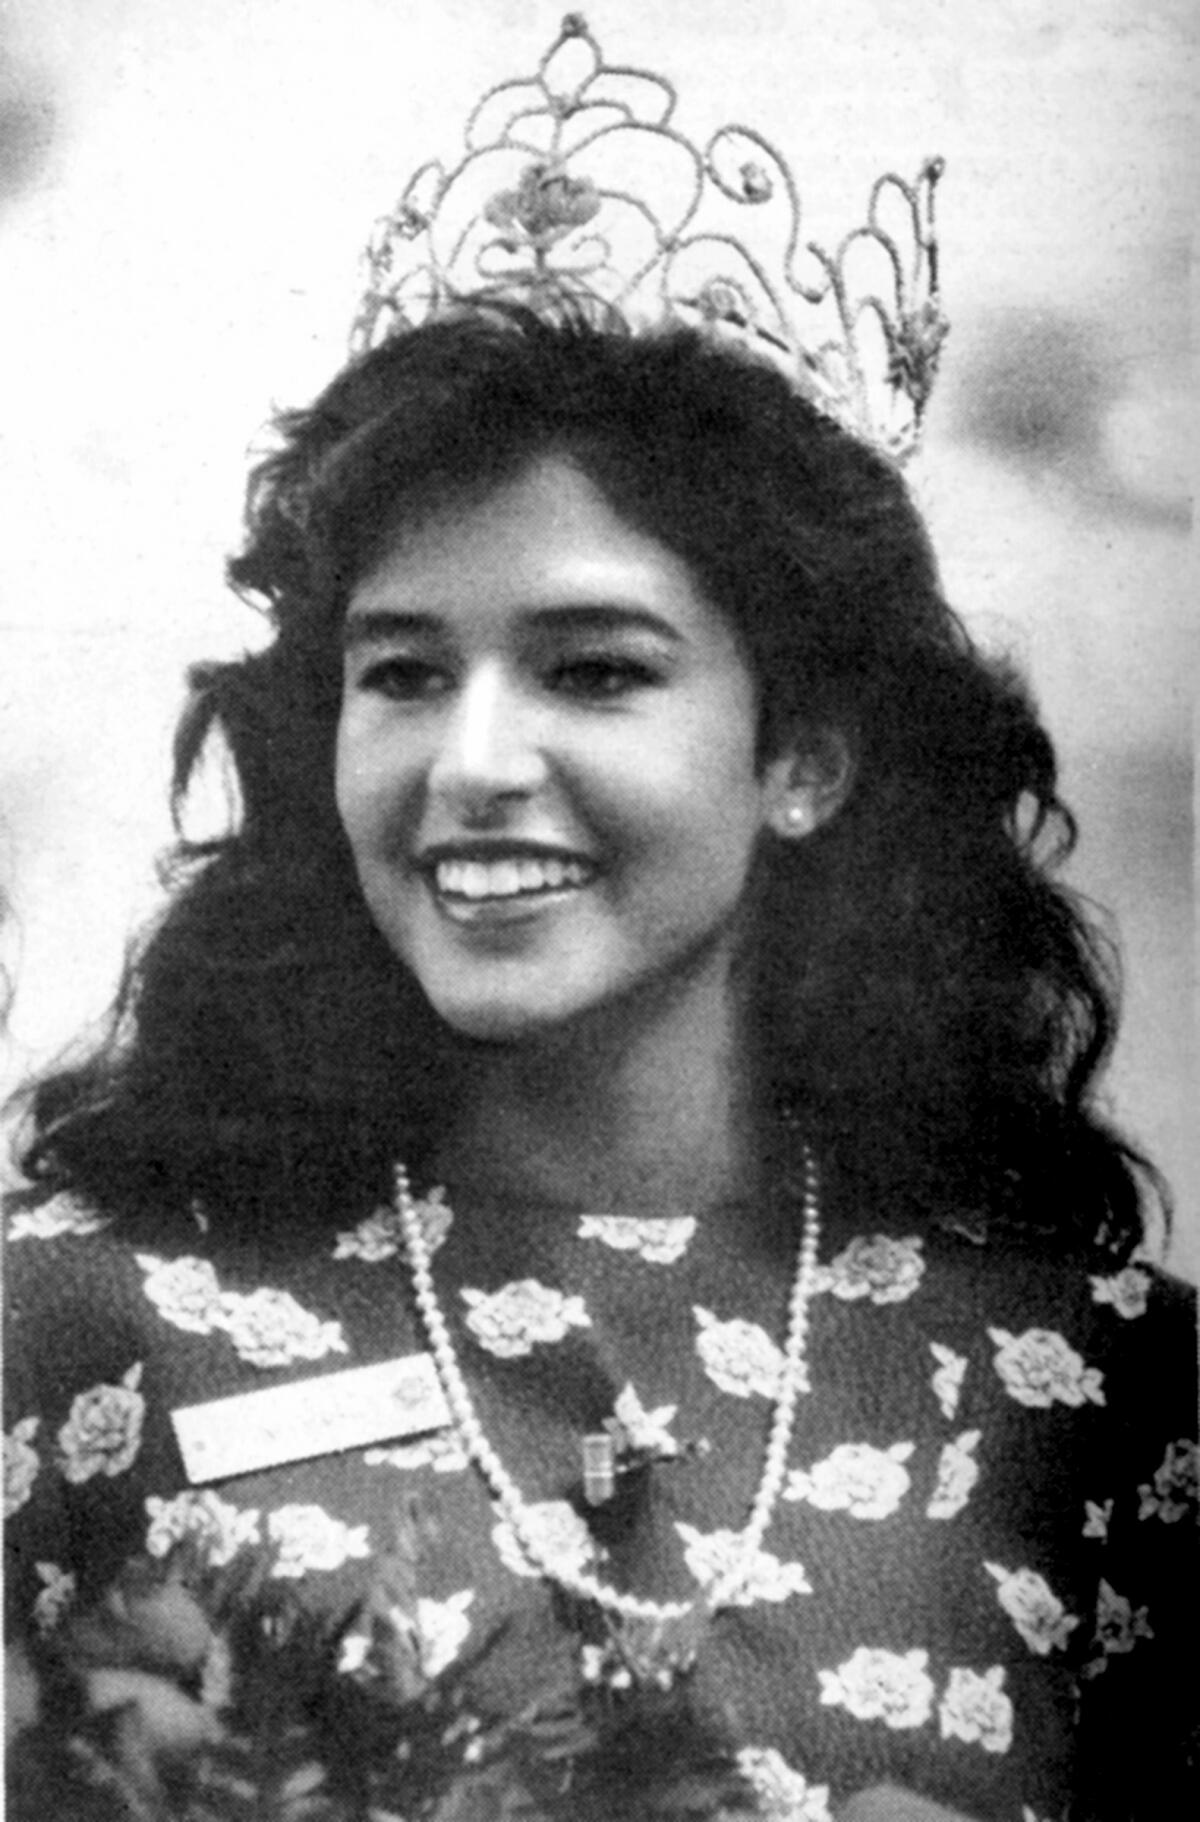 La Cañada High School student Yasmine Delawari, then 17, learned in October 1989 that she would reign as the 1990 Rose Queen for the Pasadena Tournament of Roses.